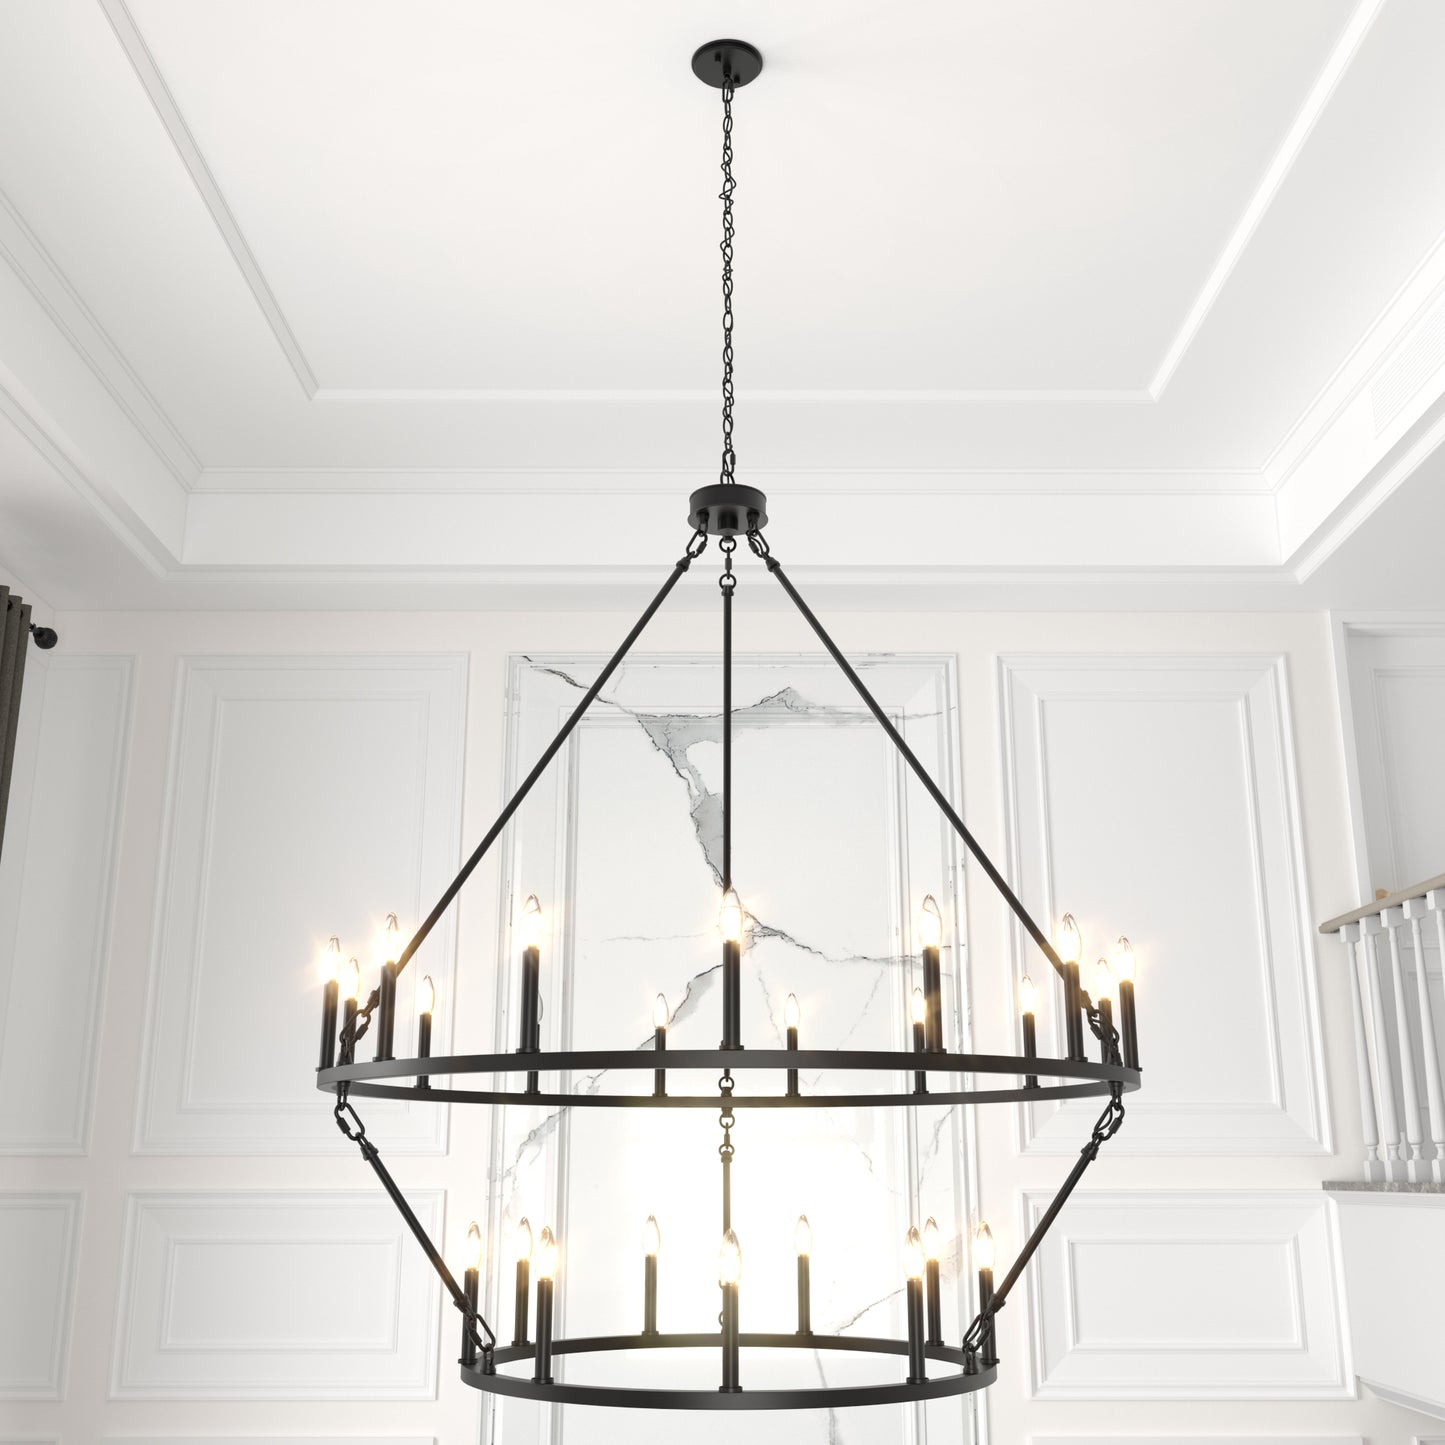 24 light wagon wheel chandelier (3) by ACROMA